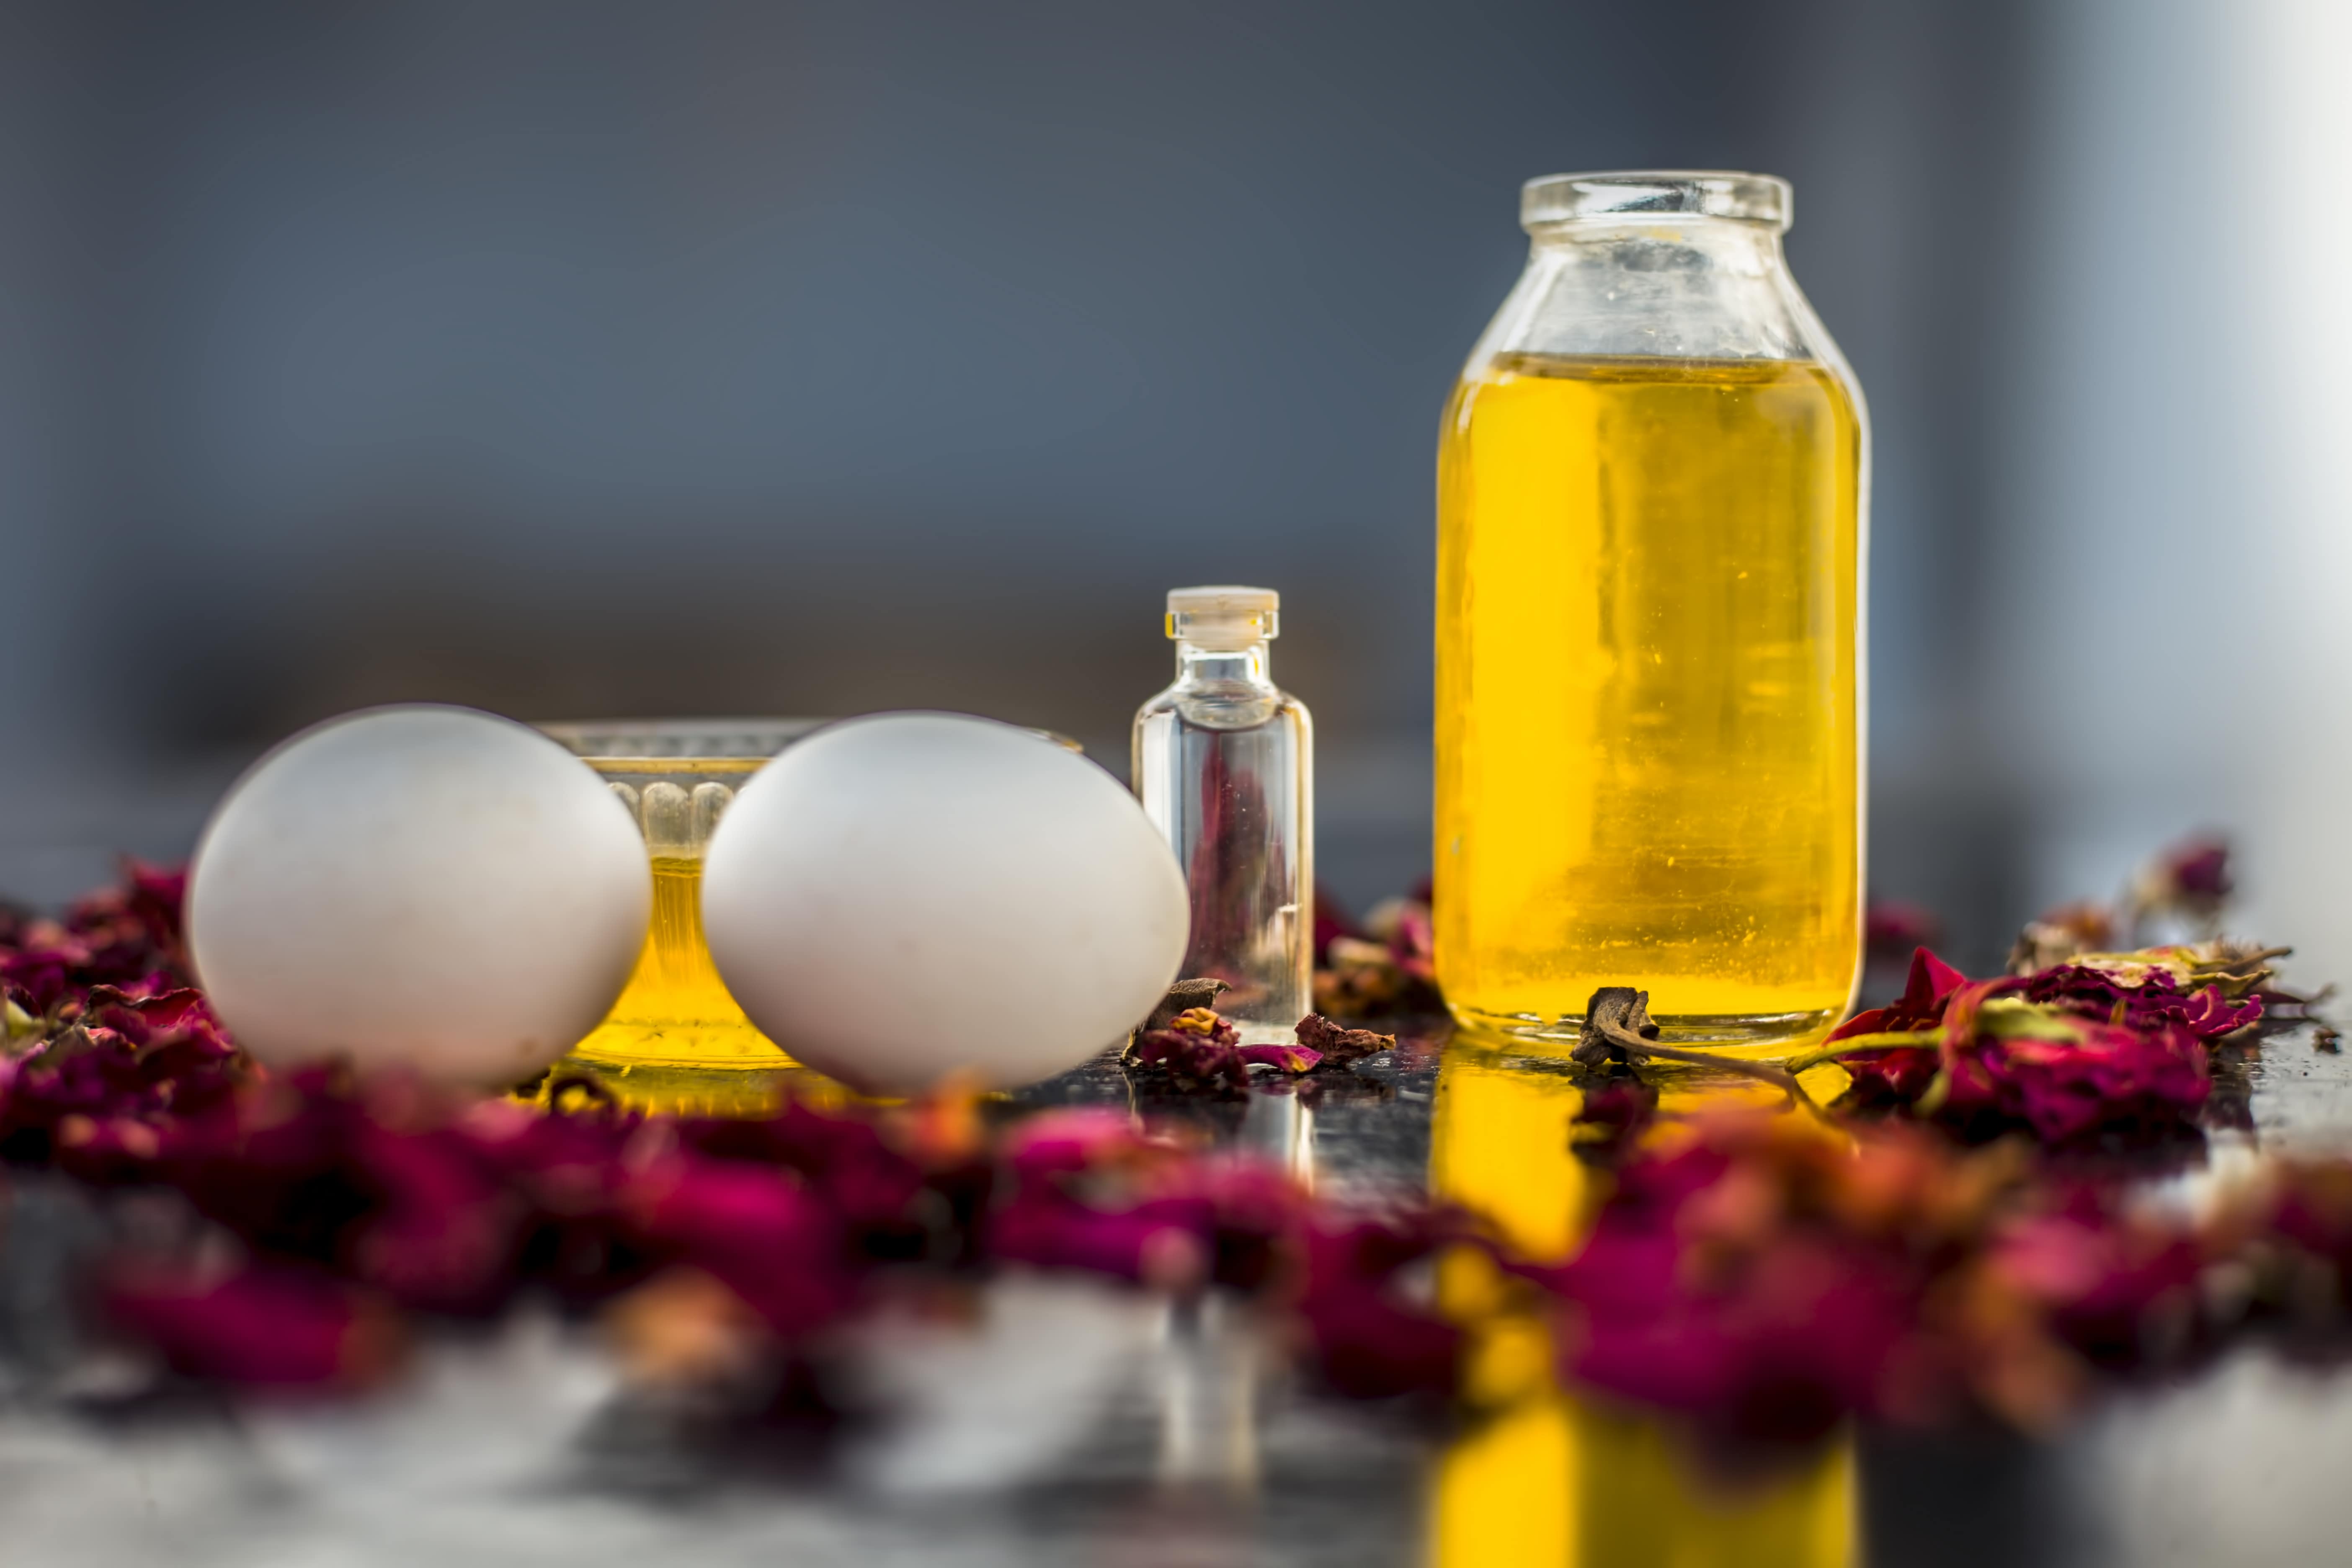 Hair oils: Beyond tradition and towards scalp health